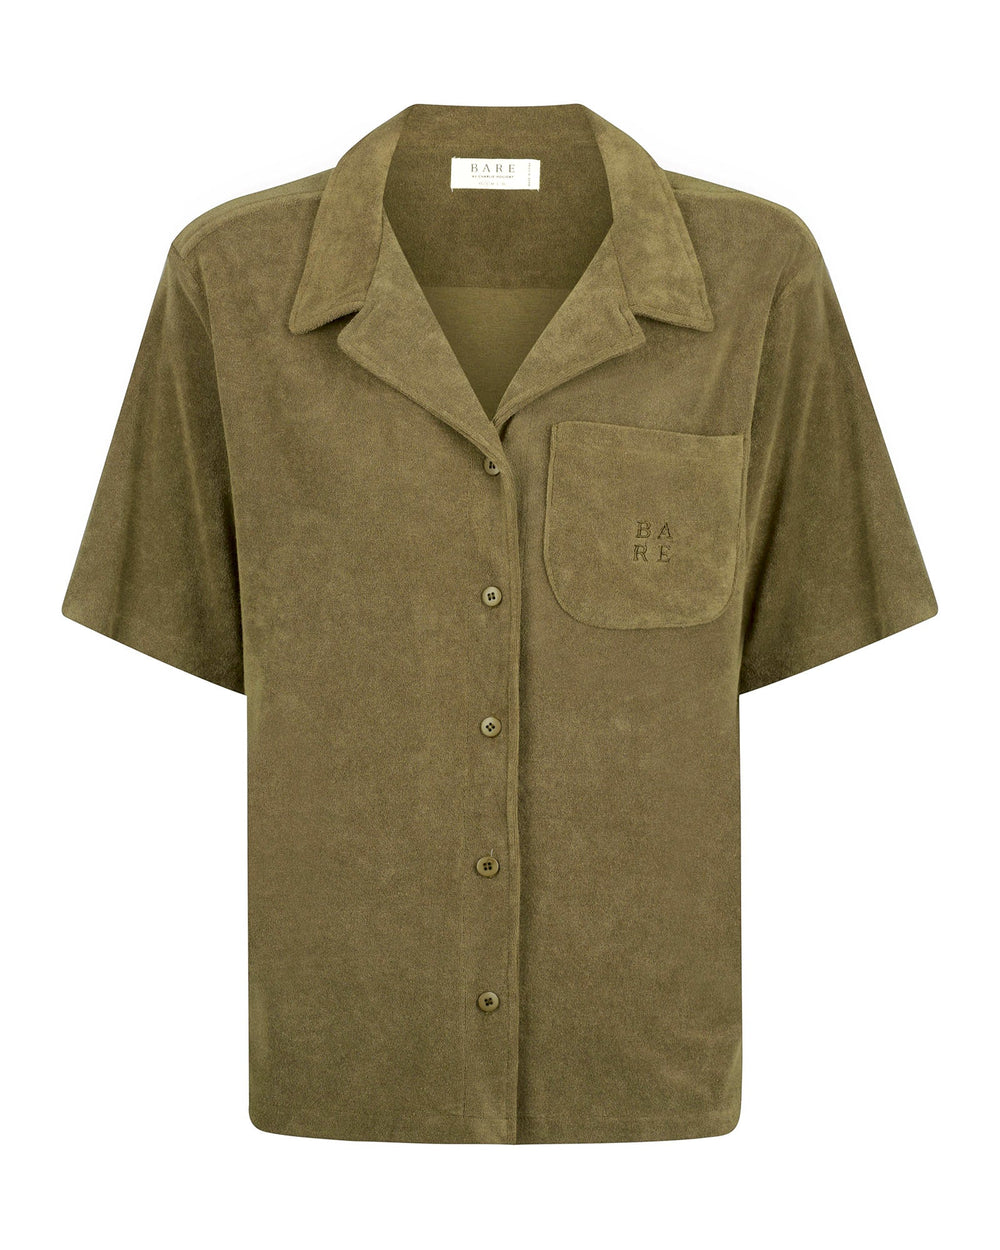 The Terry Towelling Shirt